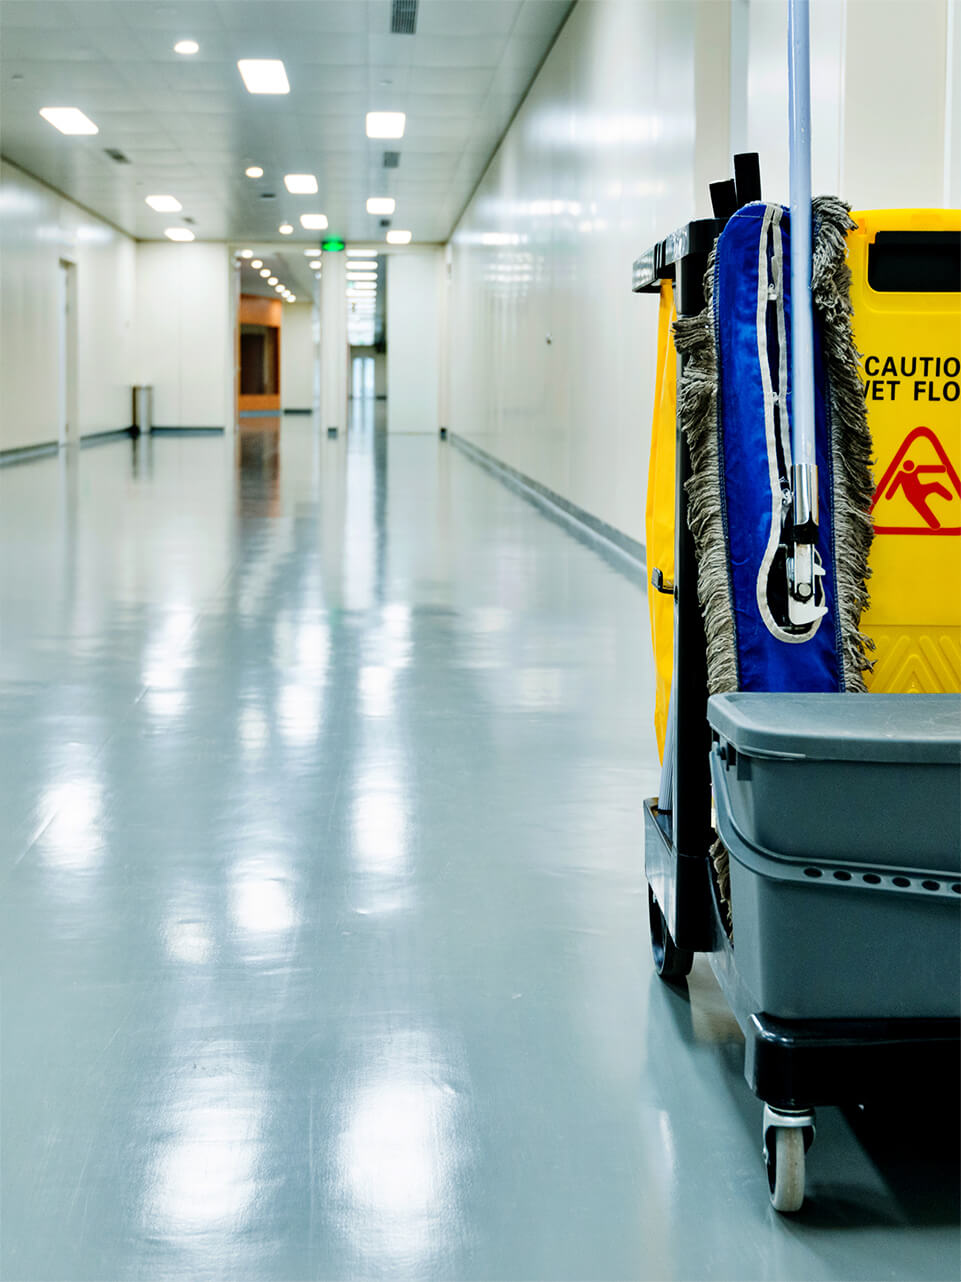 janitor cart in hallway of commercial building